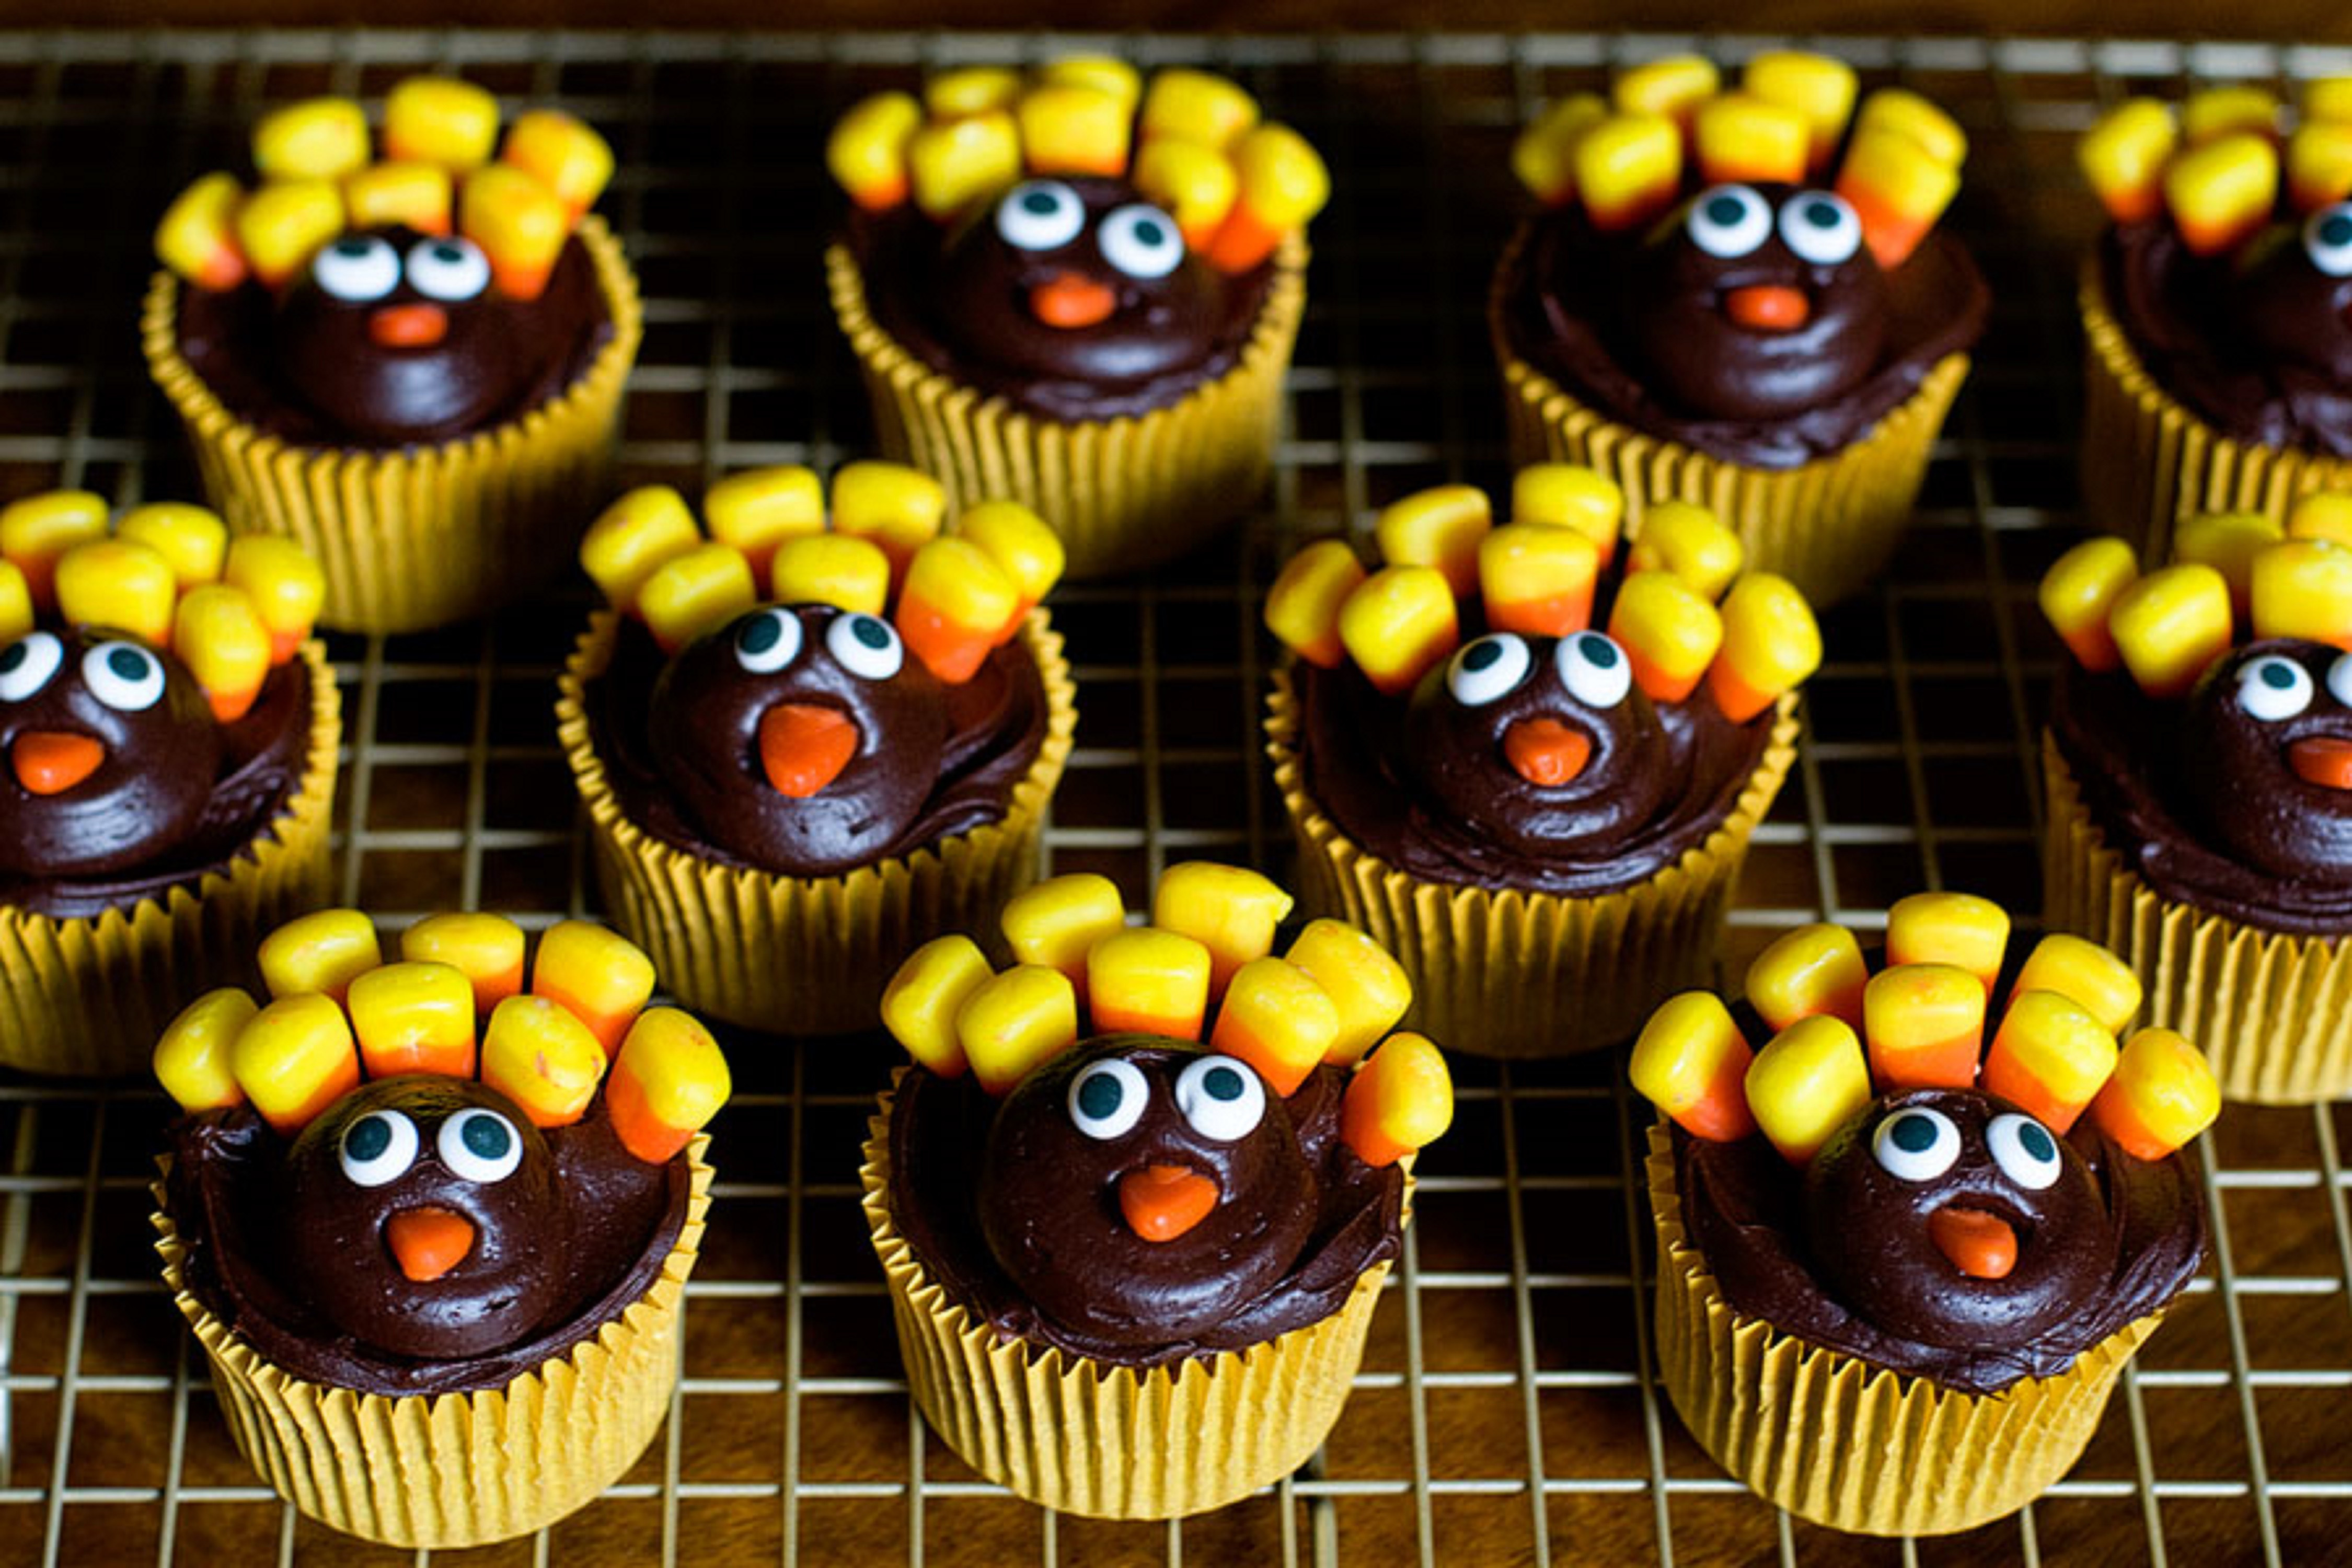 Thanksgiving Cupcakes Decorating Ideas
 11 Awesome Cupcake Decorating Ideas